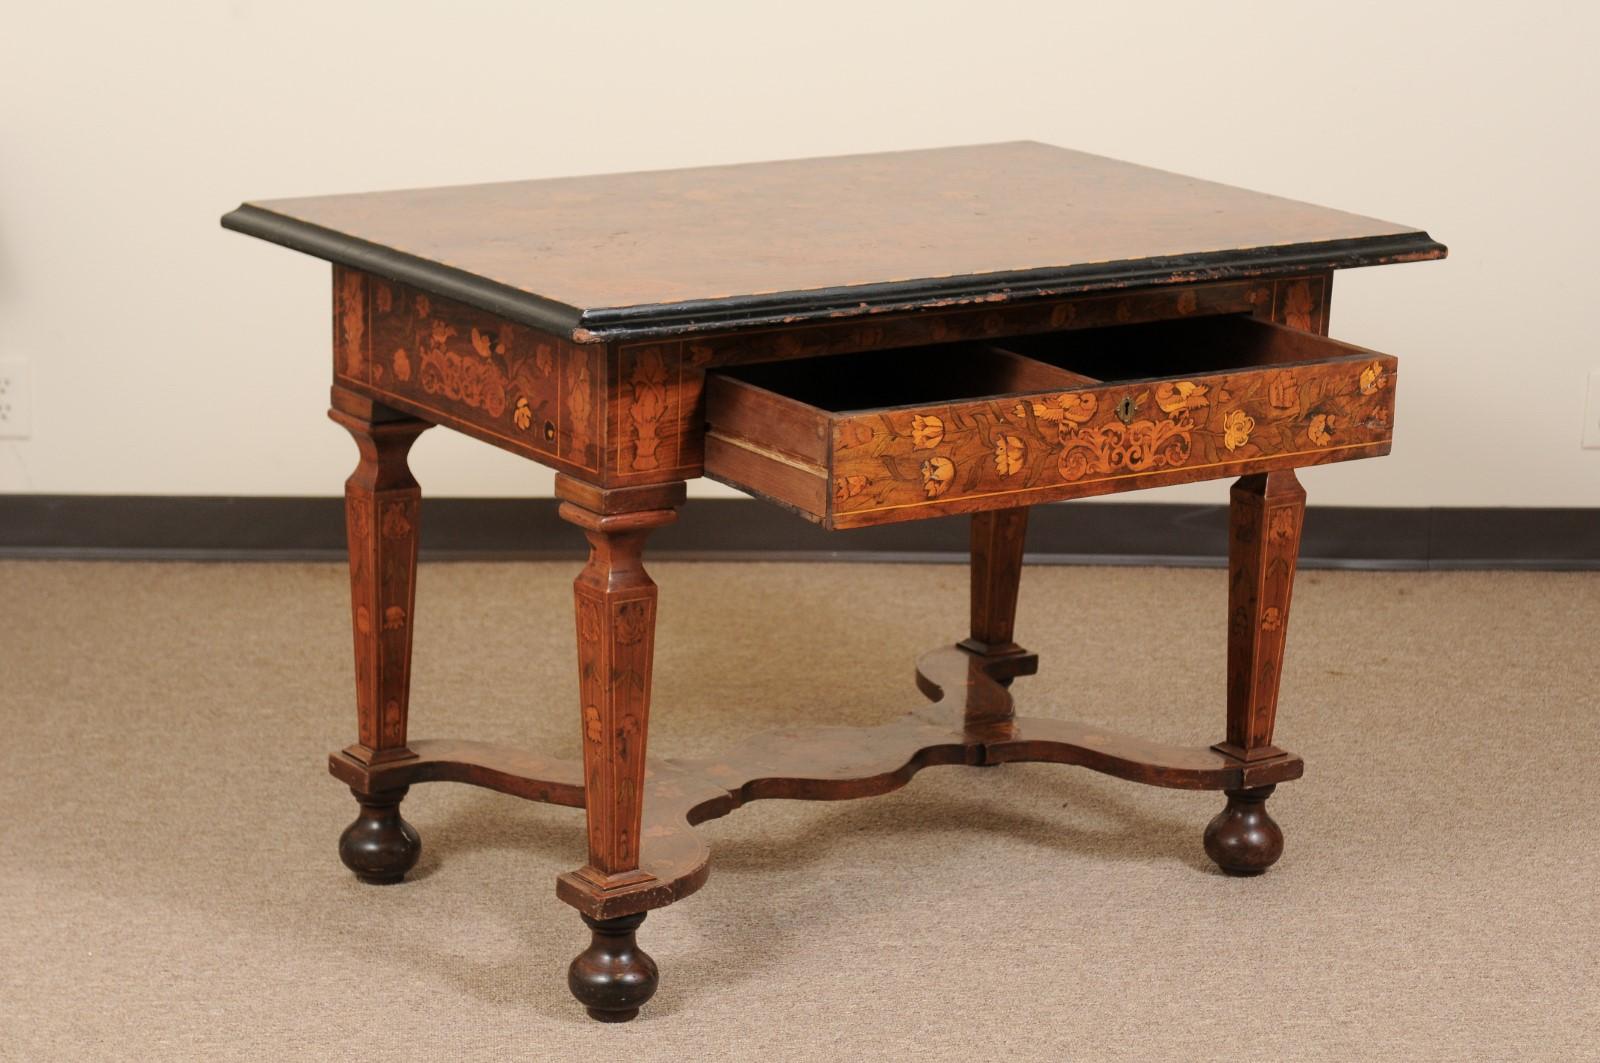 European 19th Century Continental Marquetry Inlaid Center Table For Sale